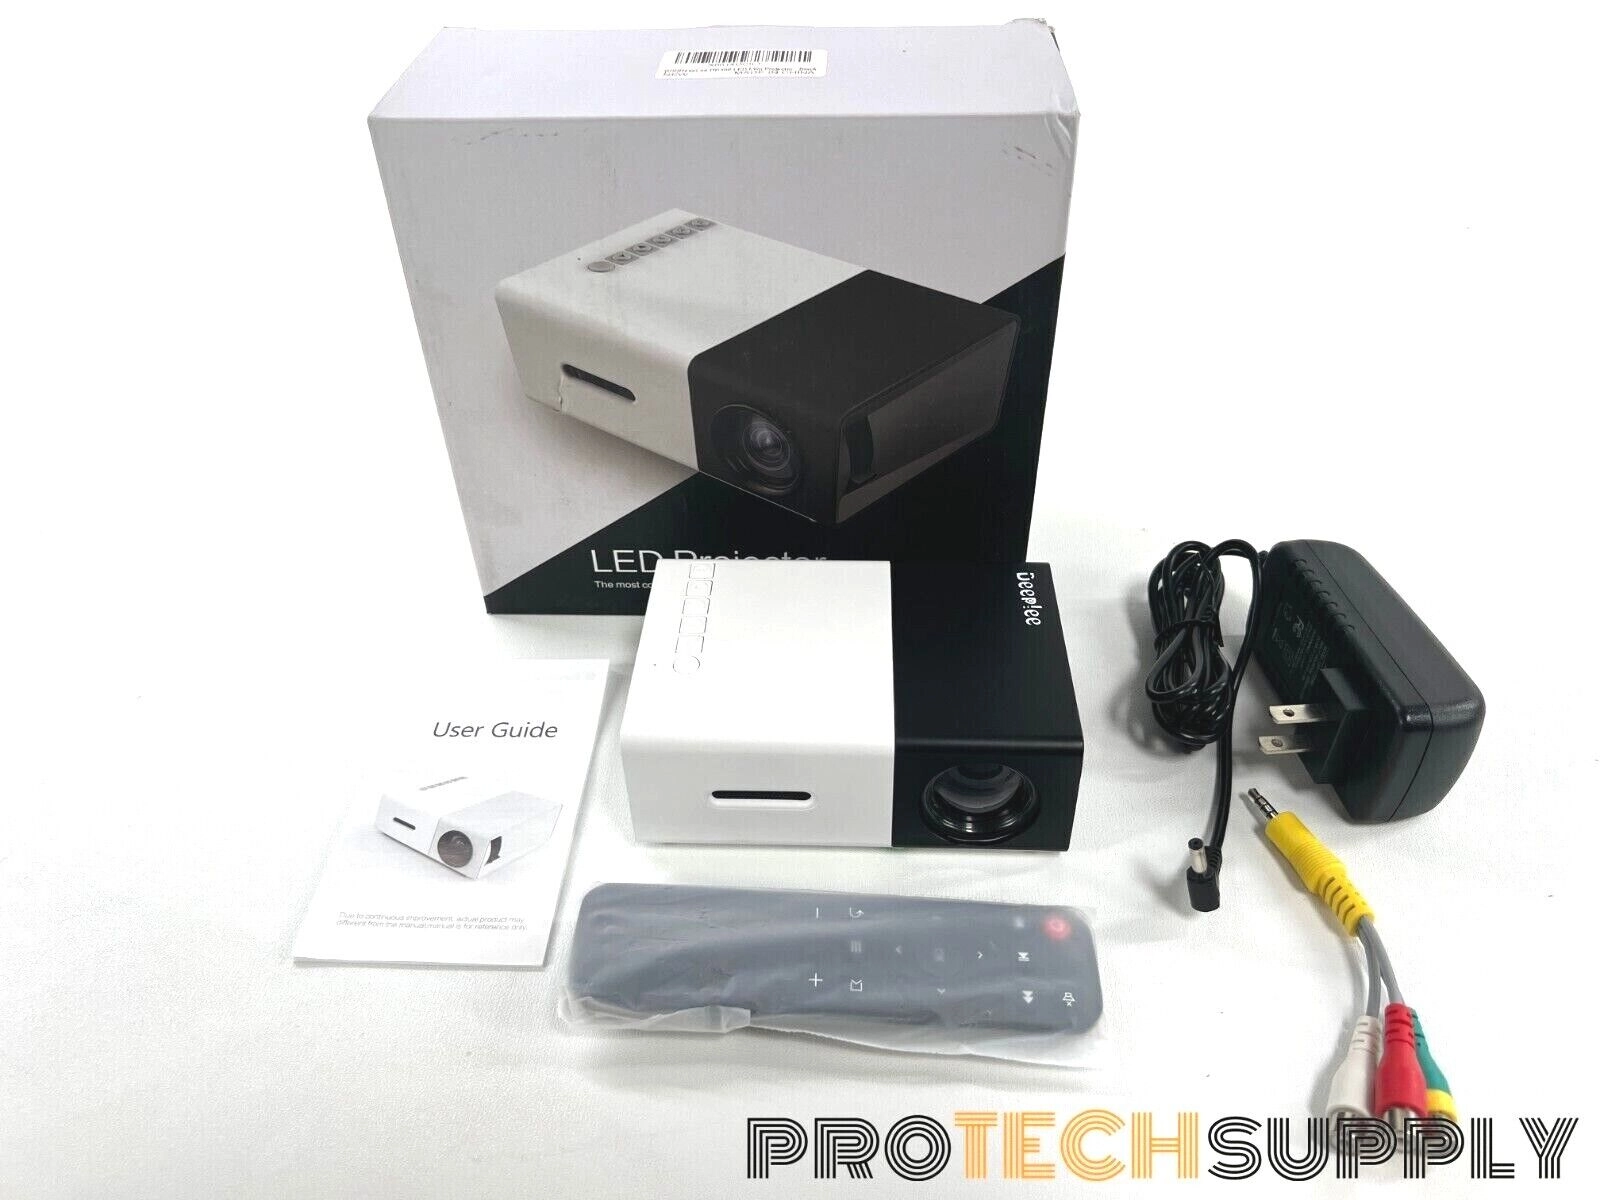 NEW DeepLee DP300 LED Mini Projector with WARRANTY